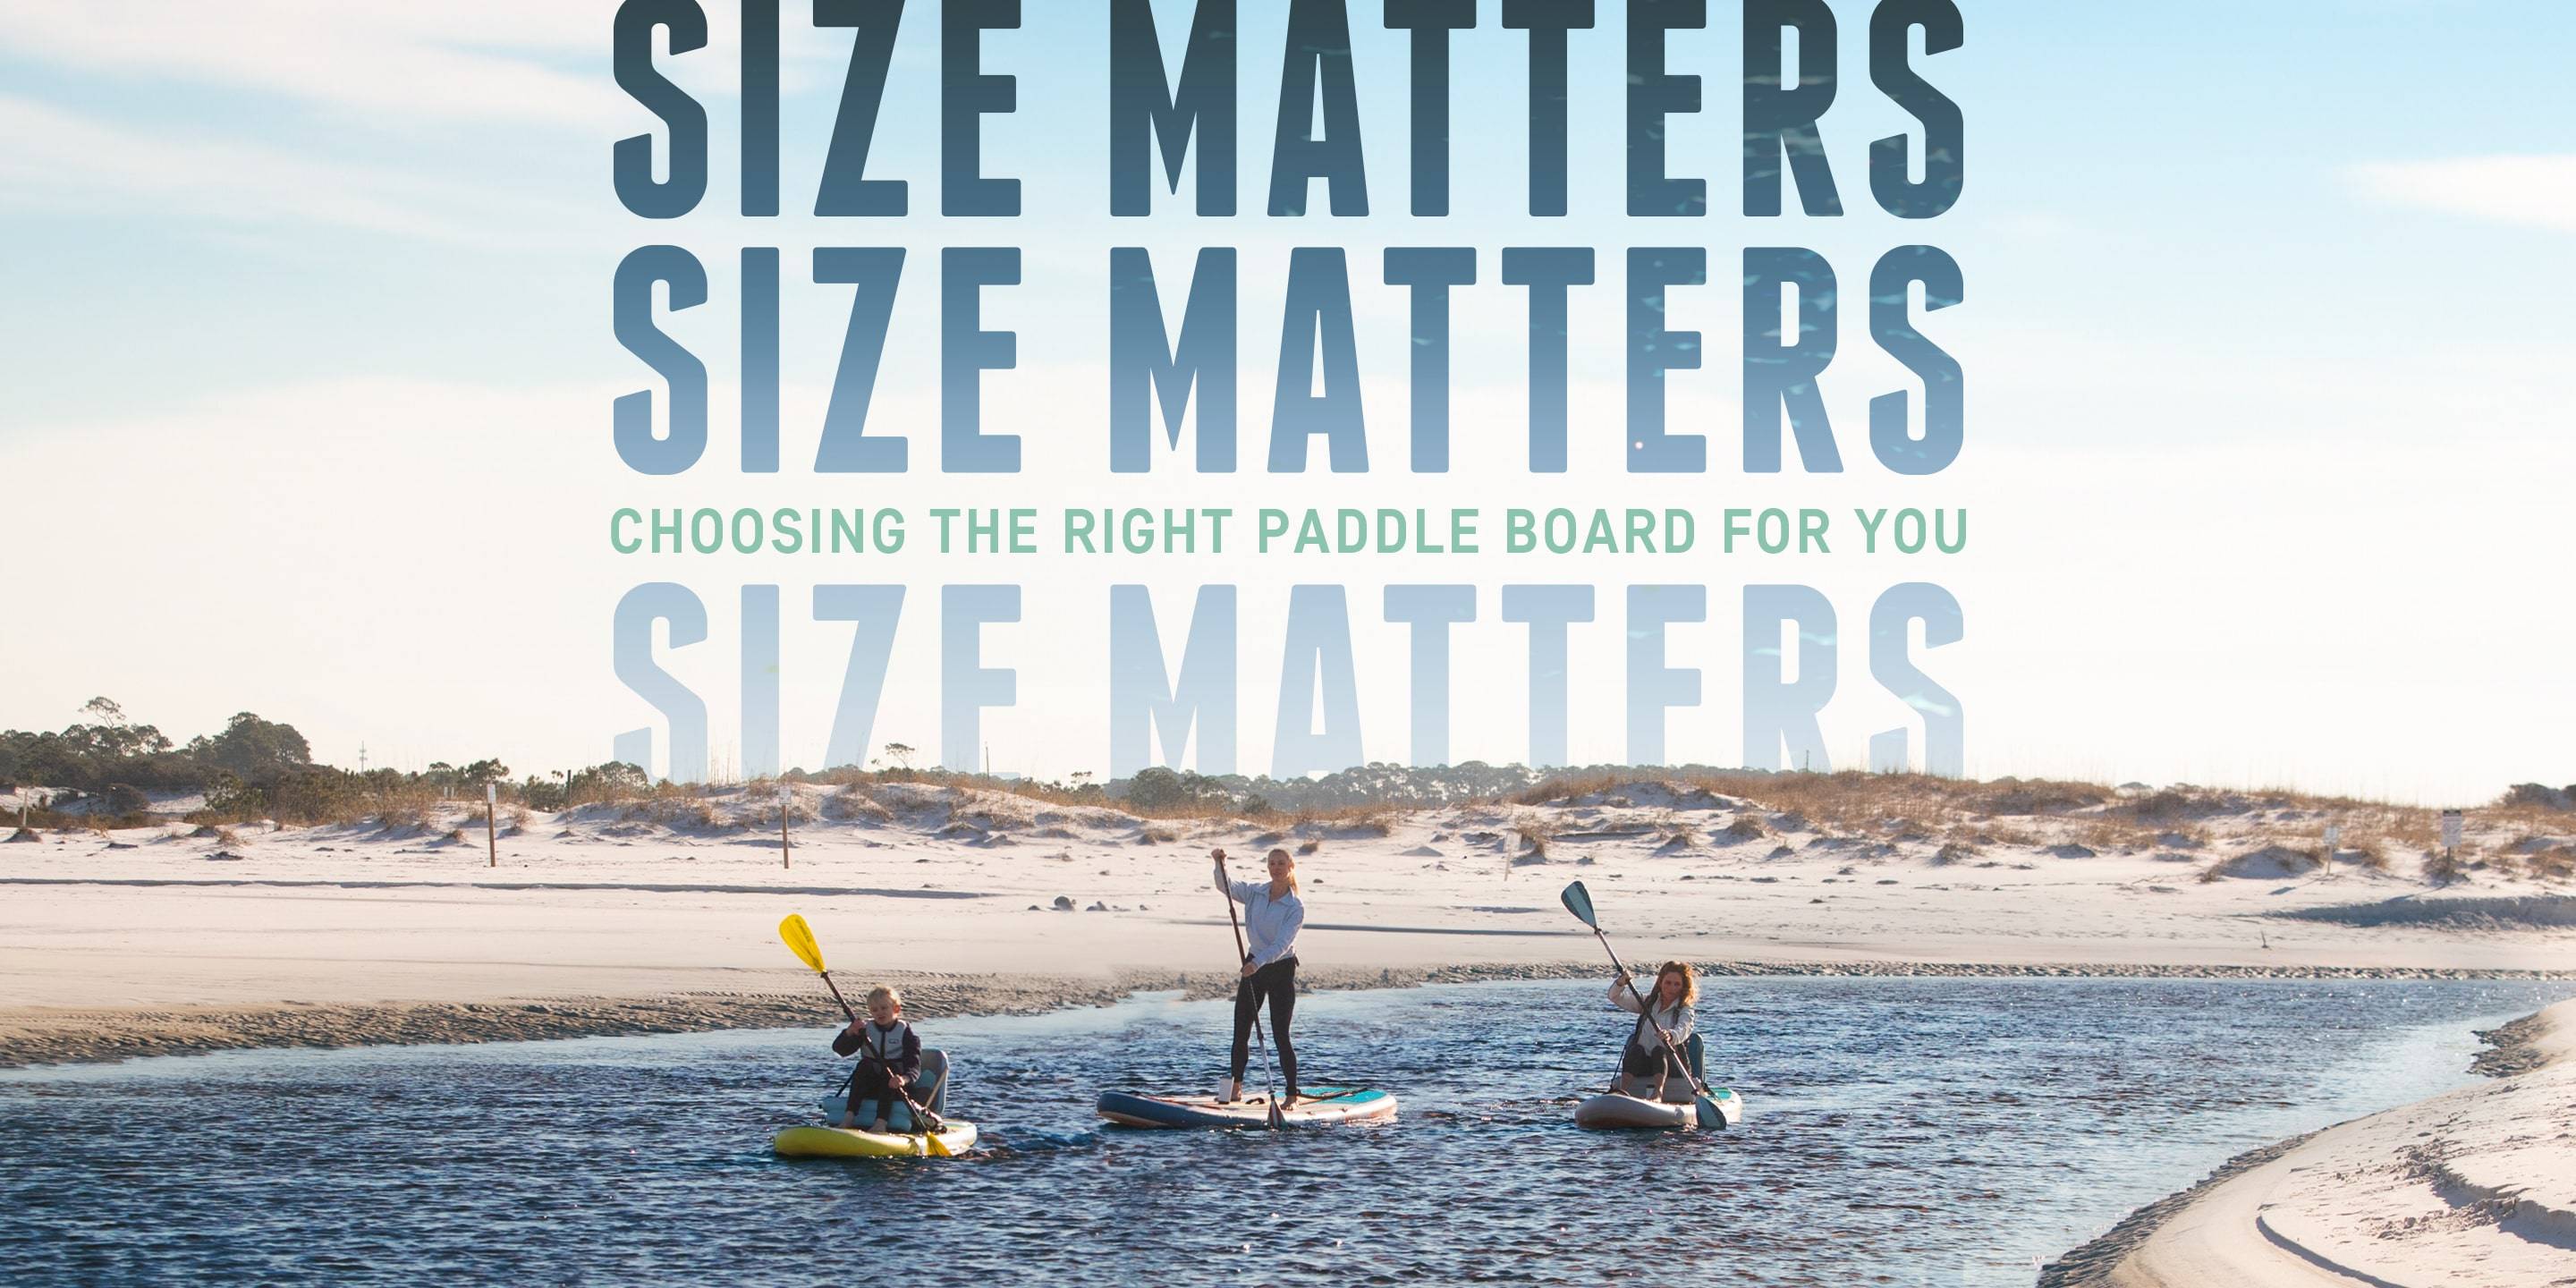 SIZE MATTERS: CHOOSING THE RIGHT PADDLE BOARD FOR YOU